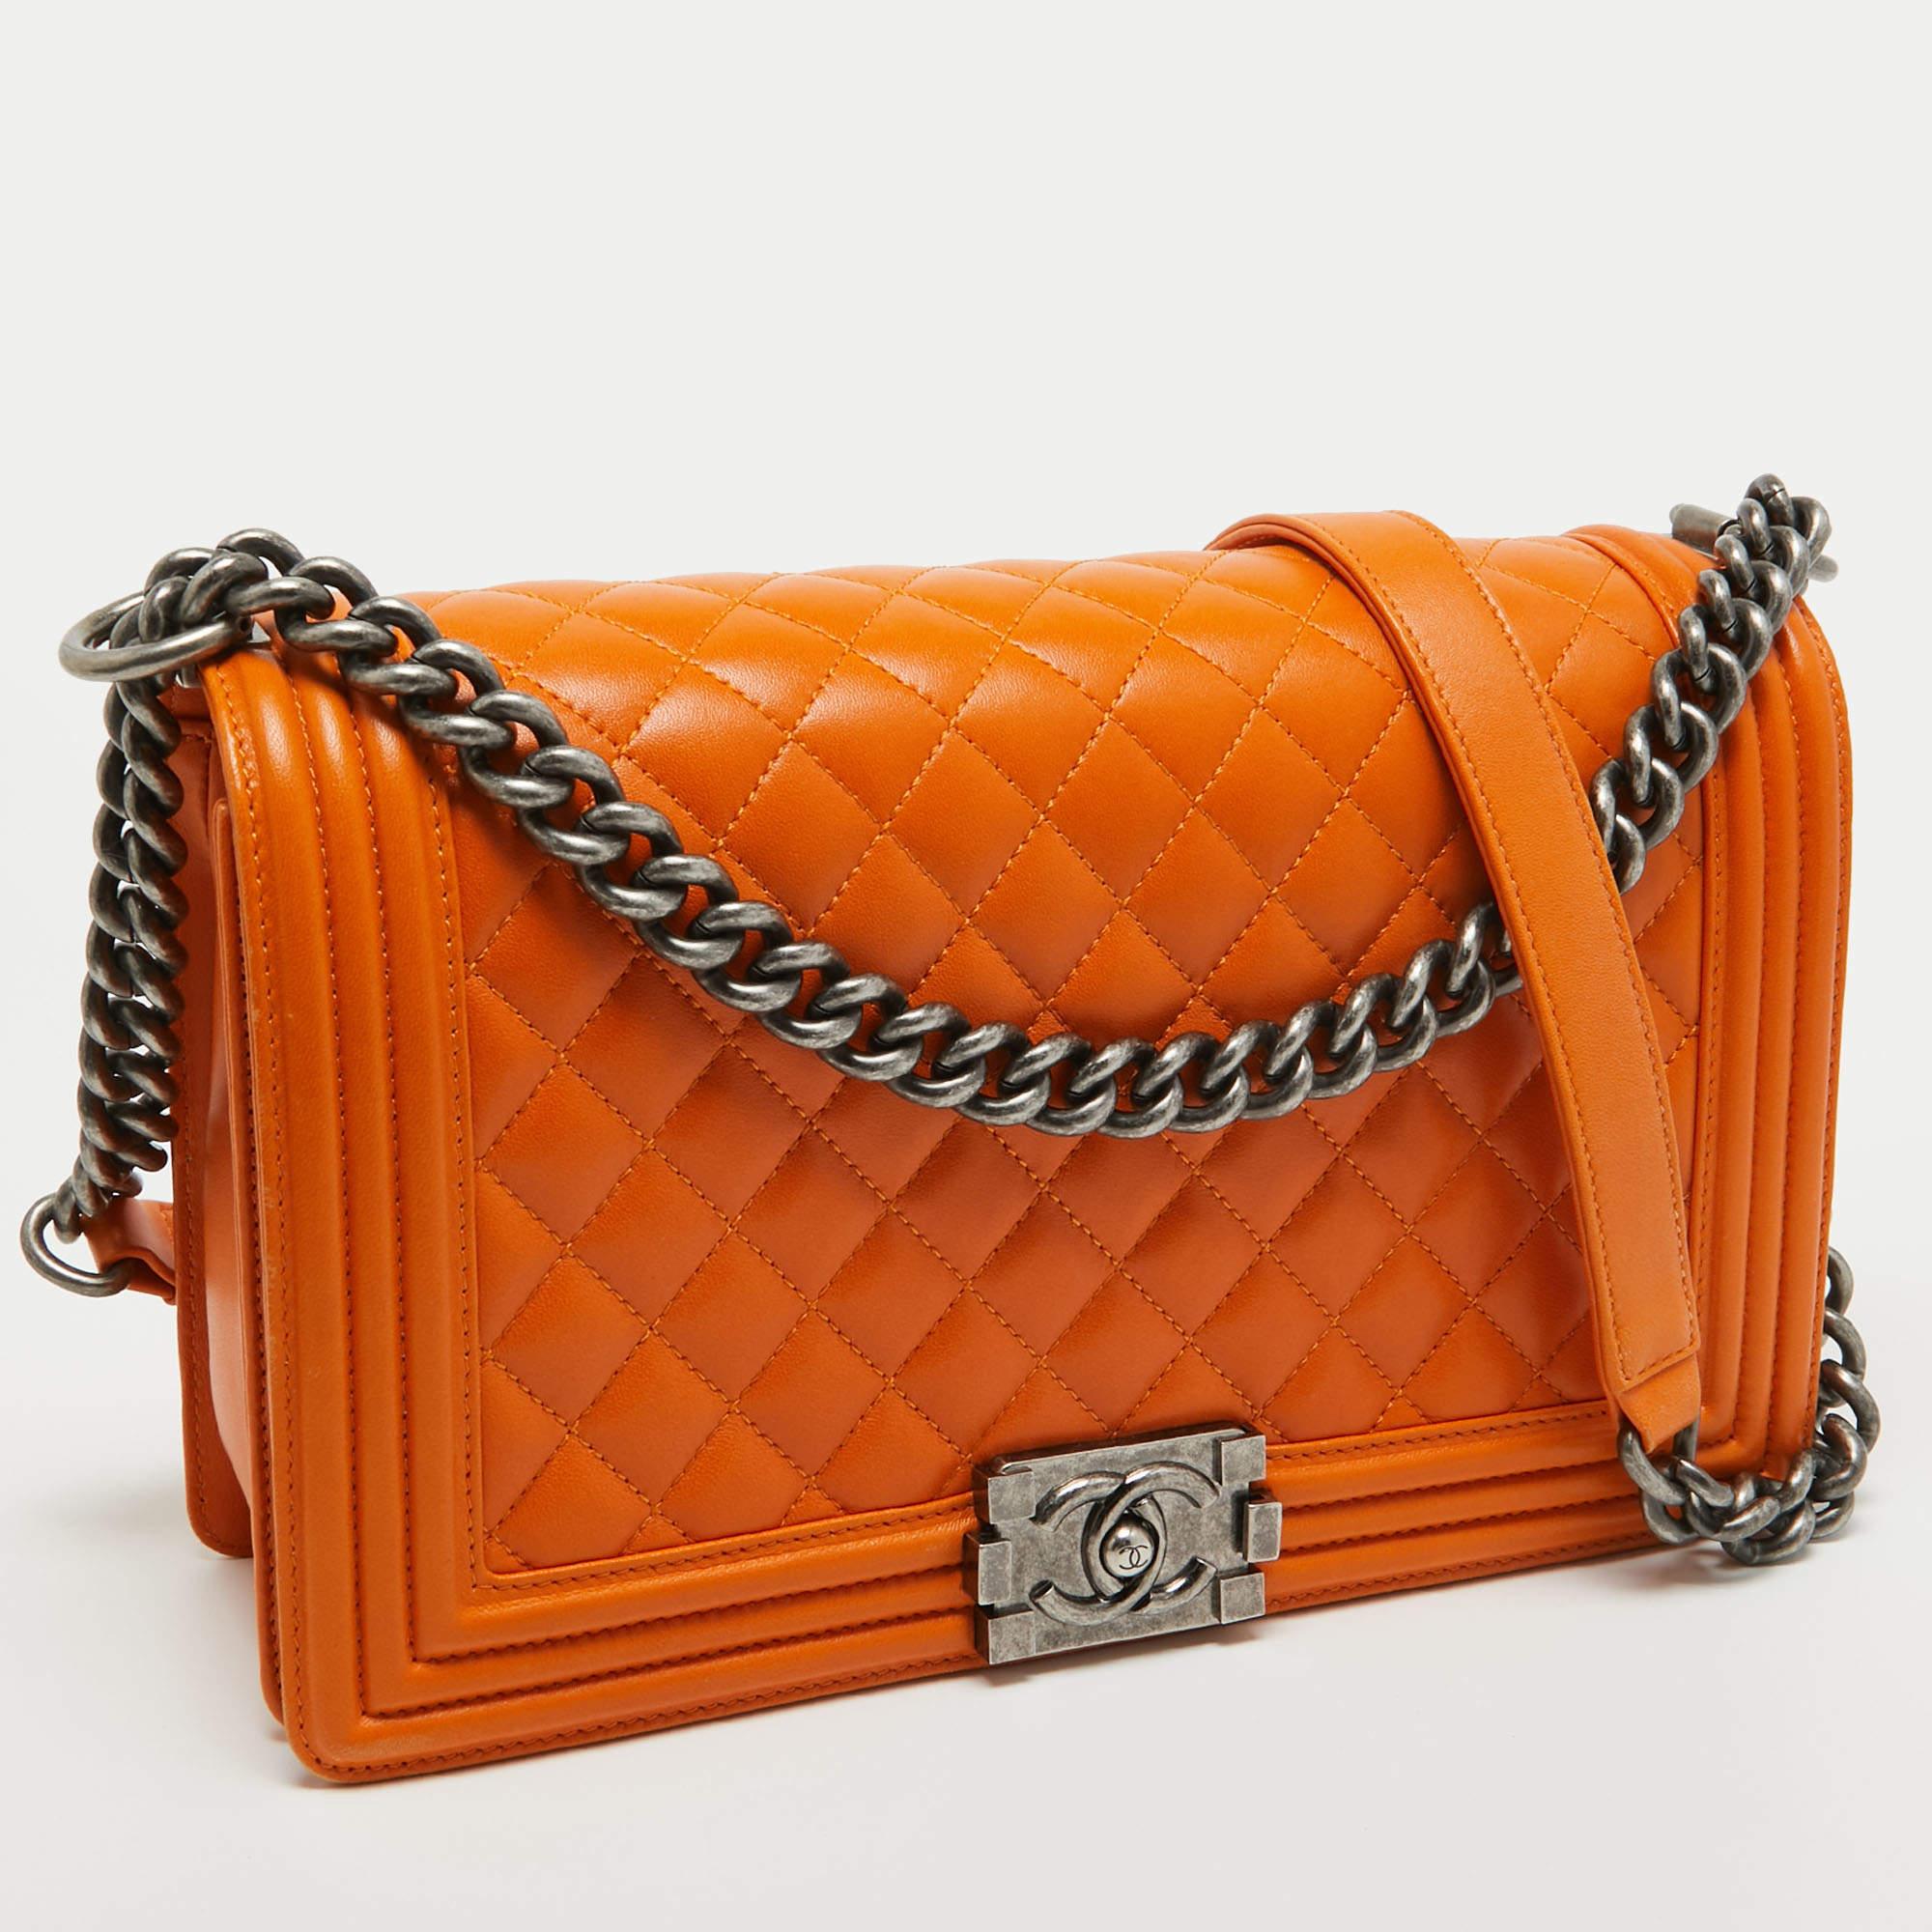 Chanel Orange Quilted Leather New Medium Boy Bag In Excellent Condition For Sale In Dubai, Al Qouz 2